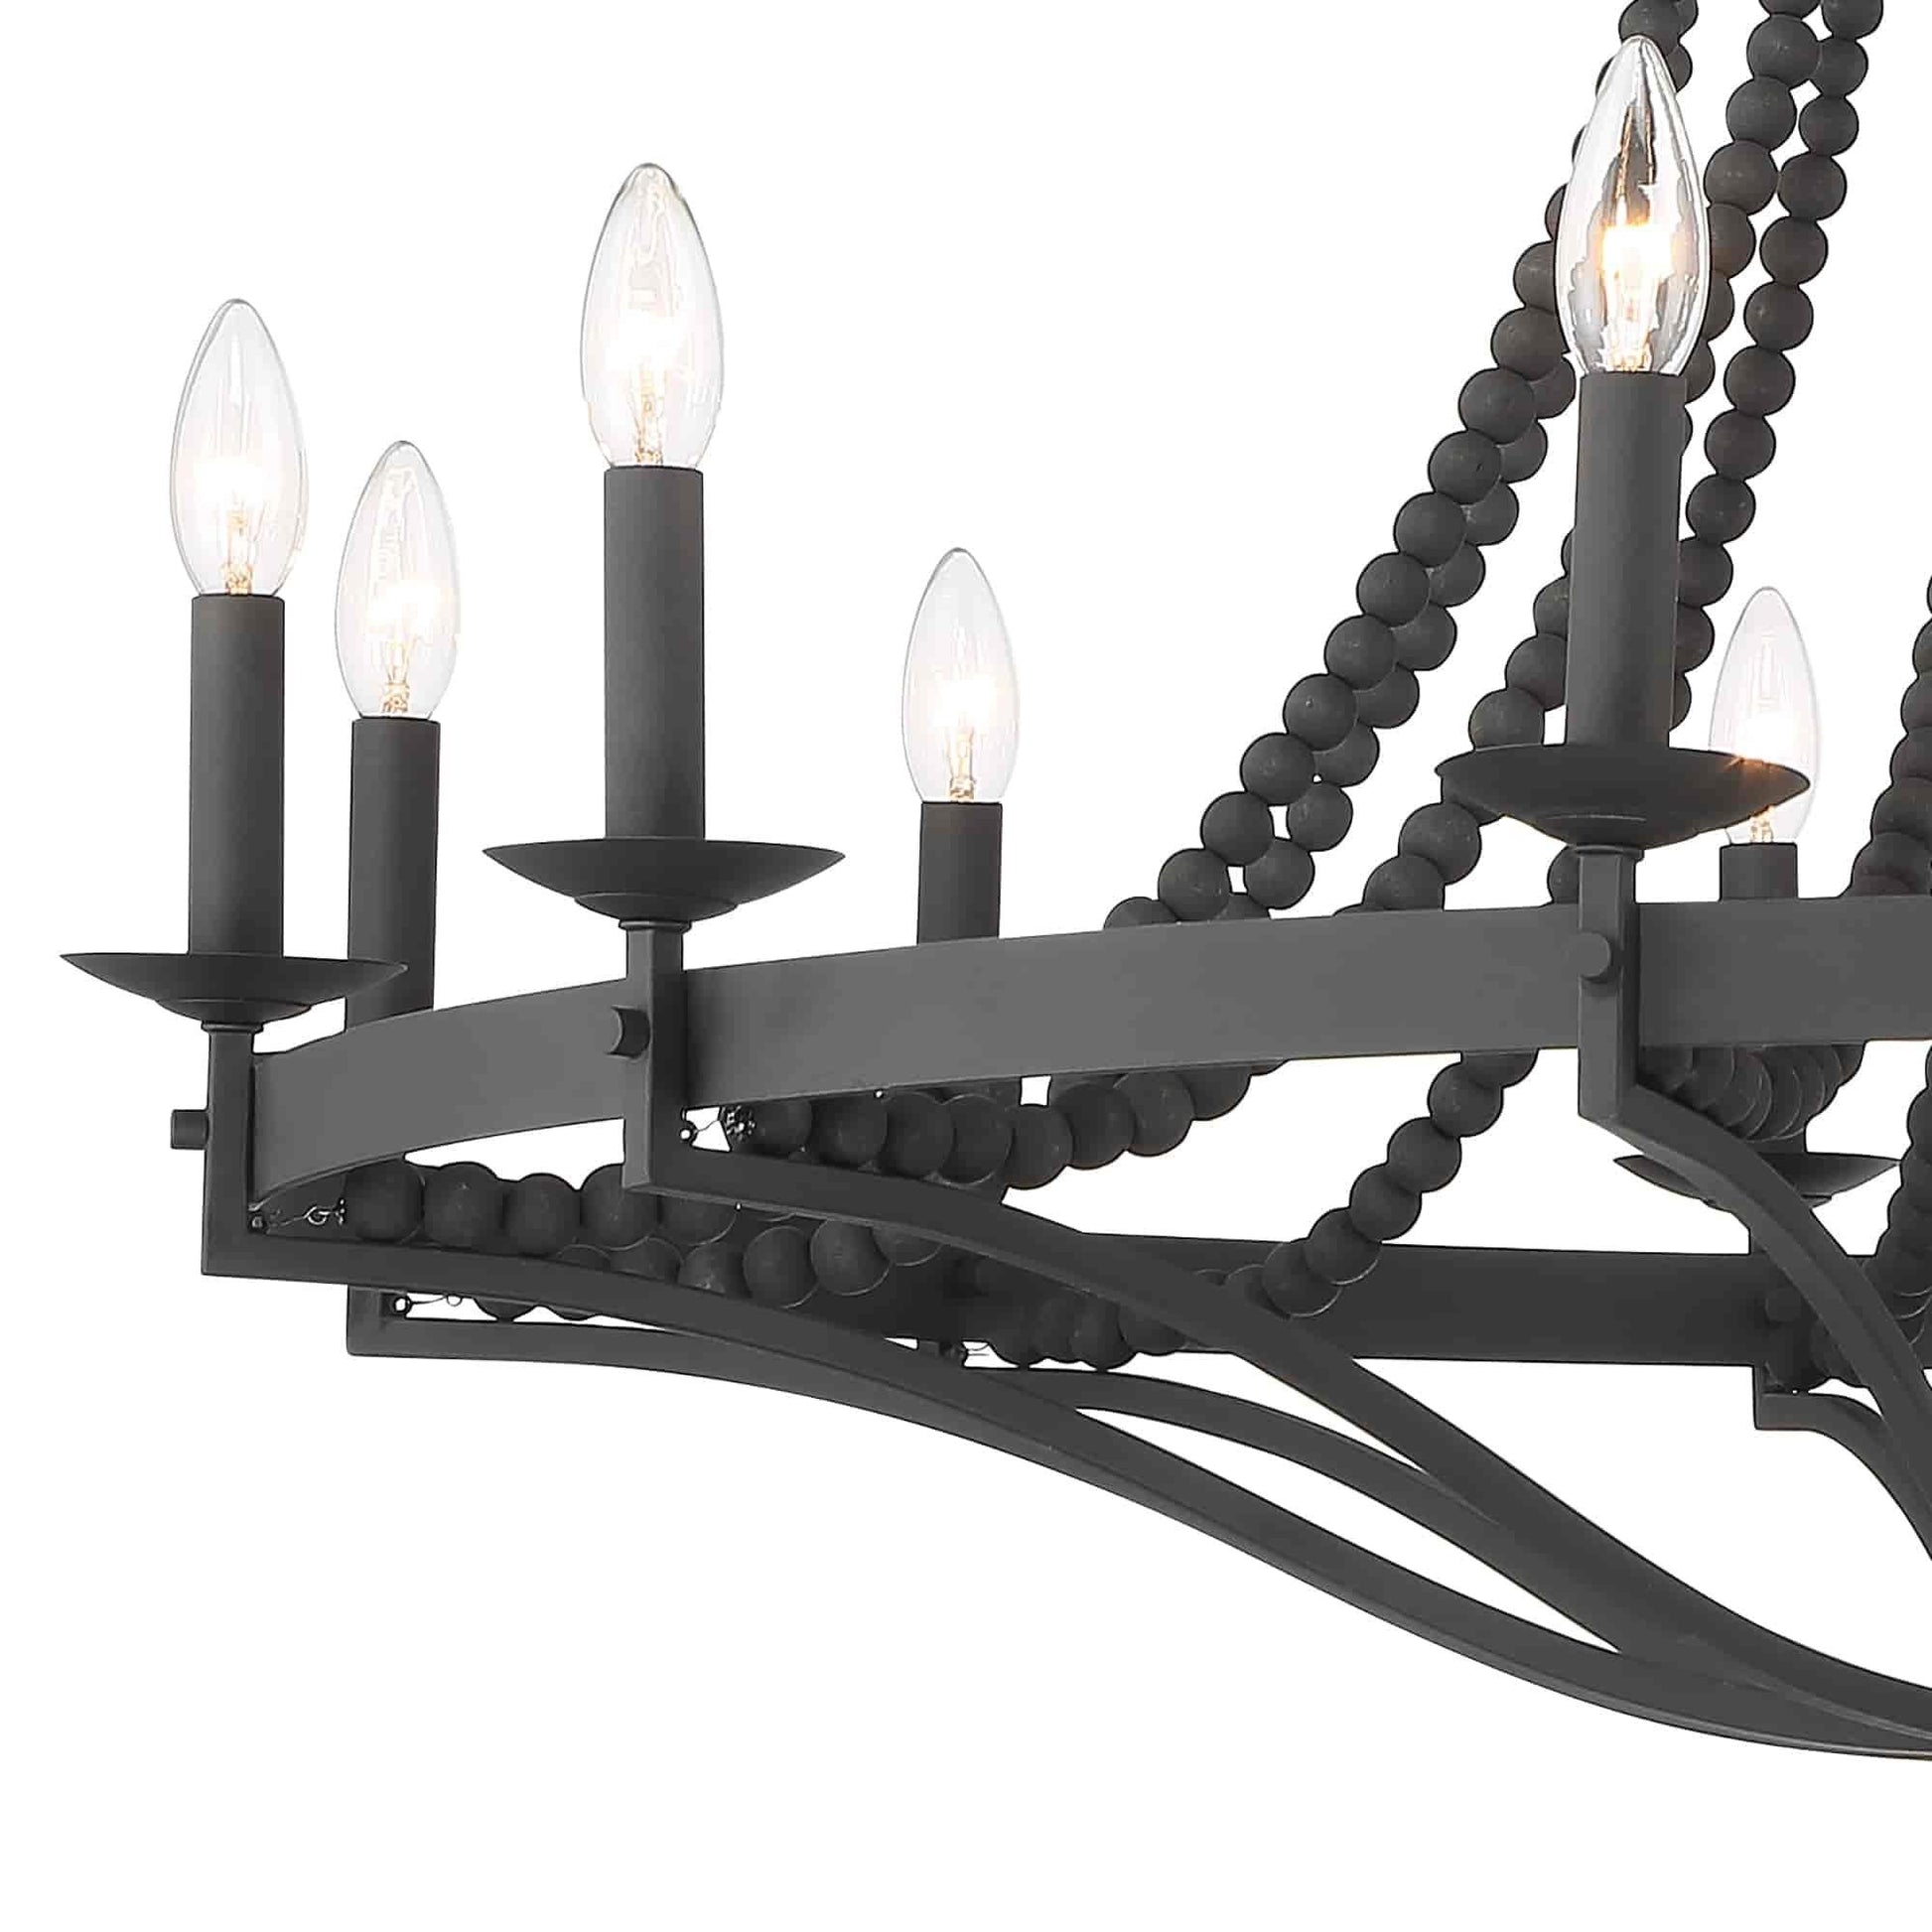 12 light candle style wagon wheel chandelier with beaded accents (3) by ACROMA